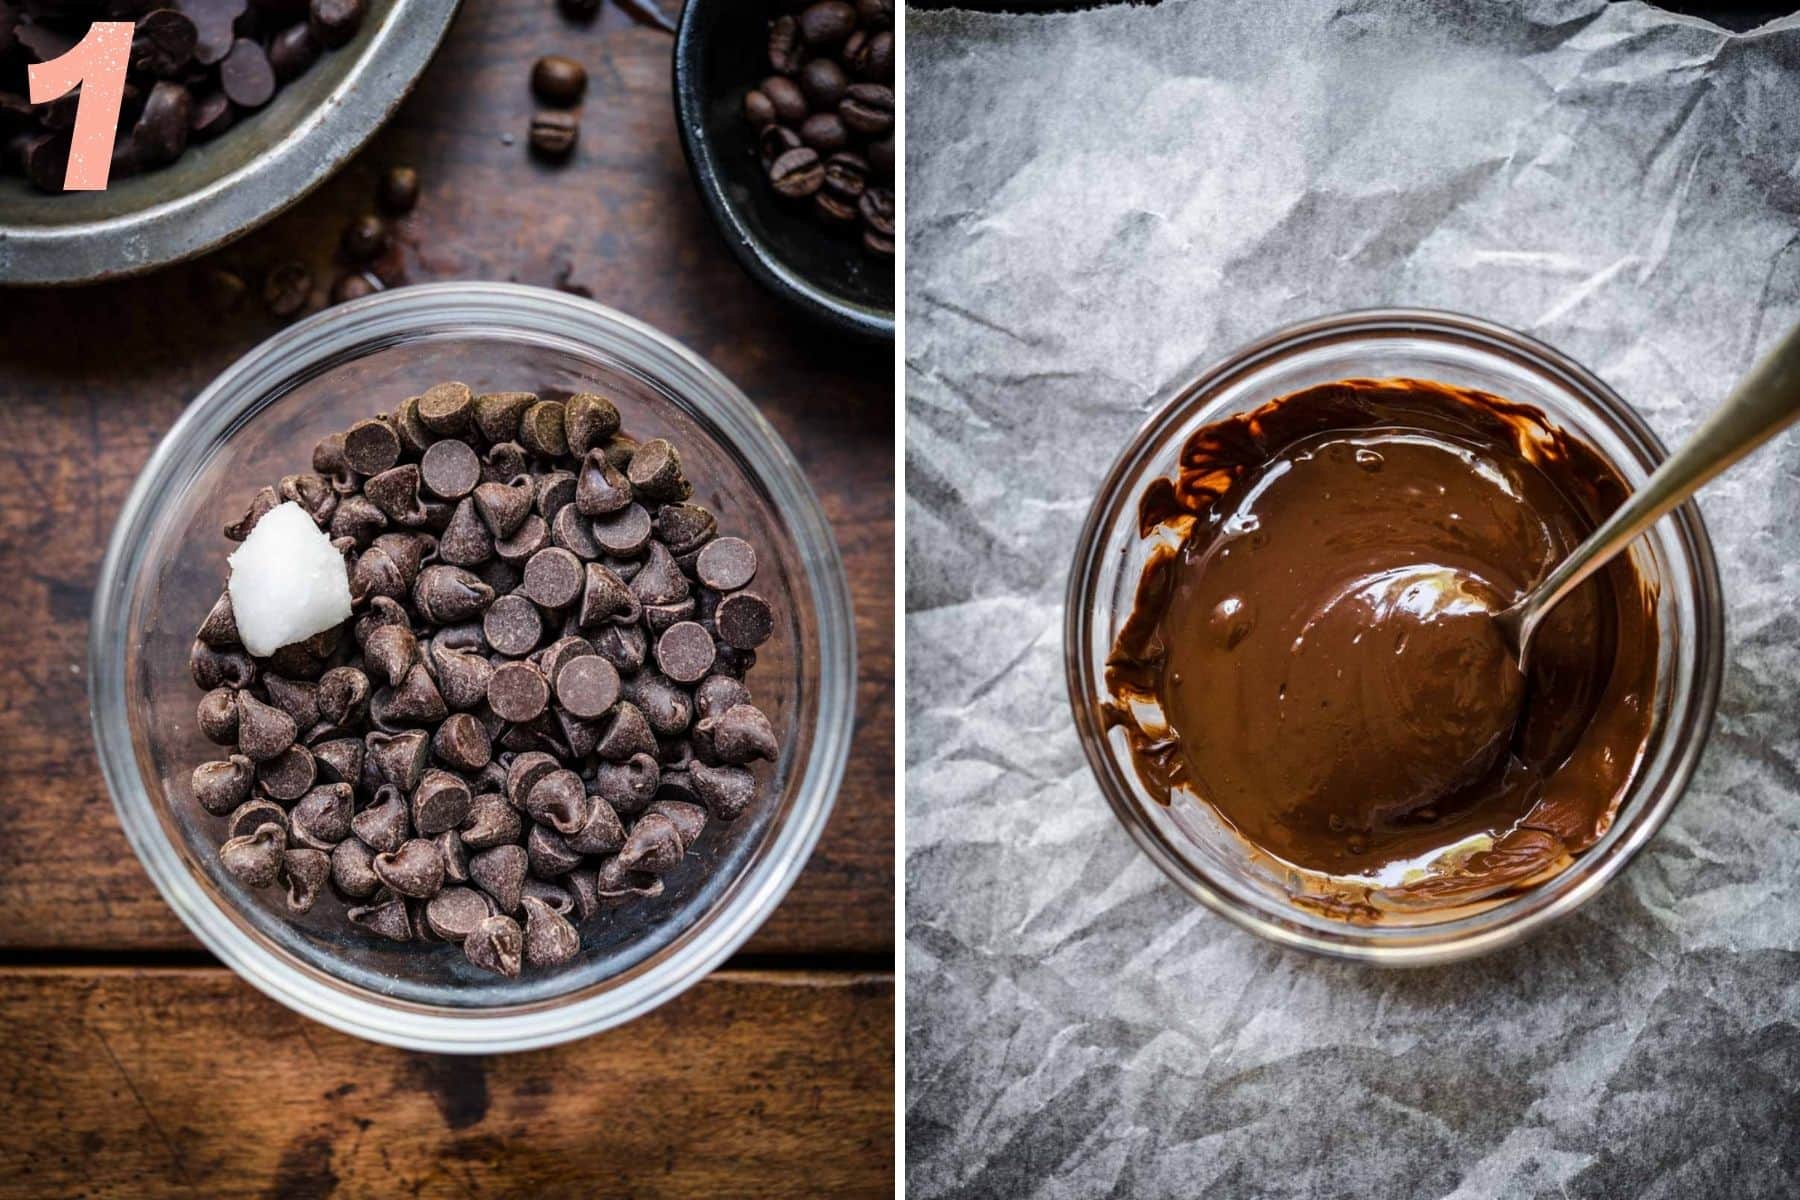 On the left: chocolate before melting. On the right: chocolate after being melted.